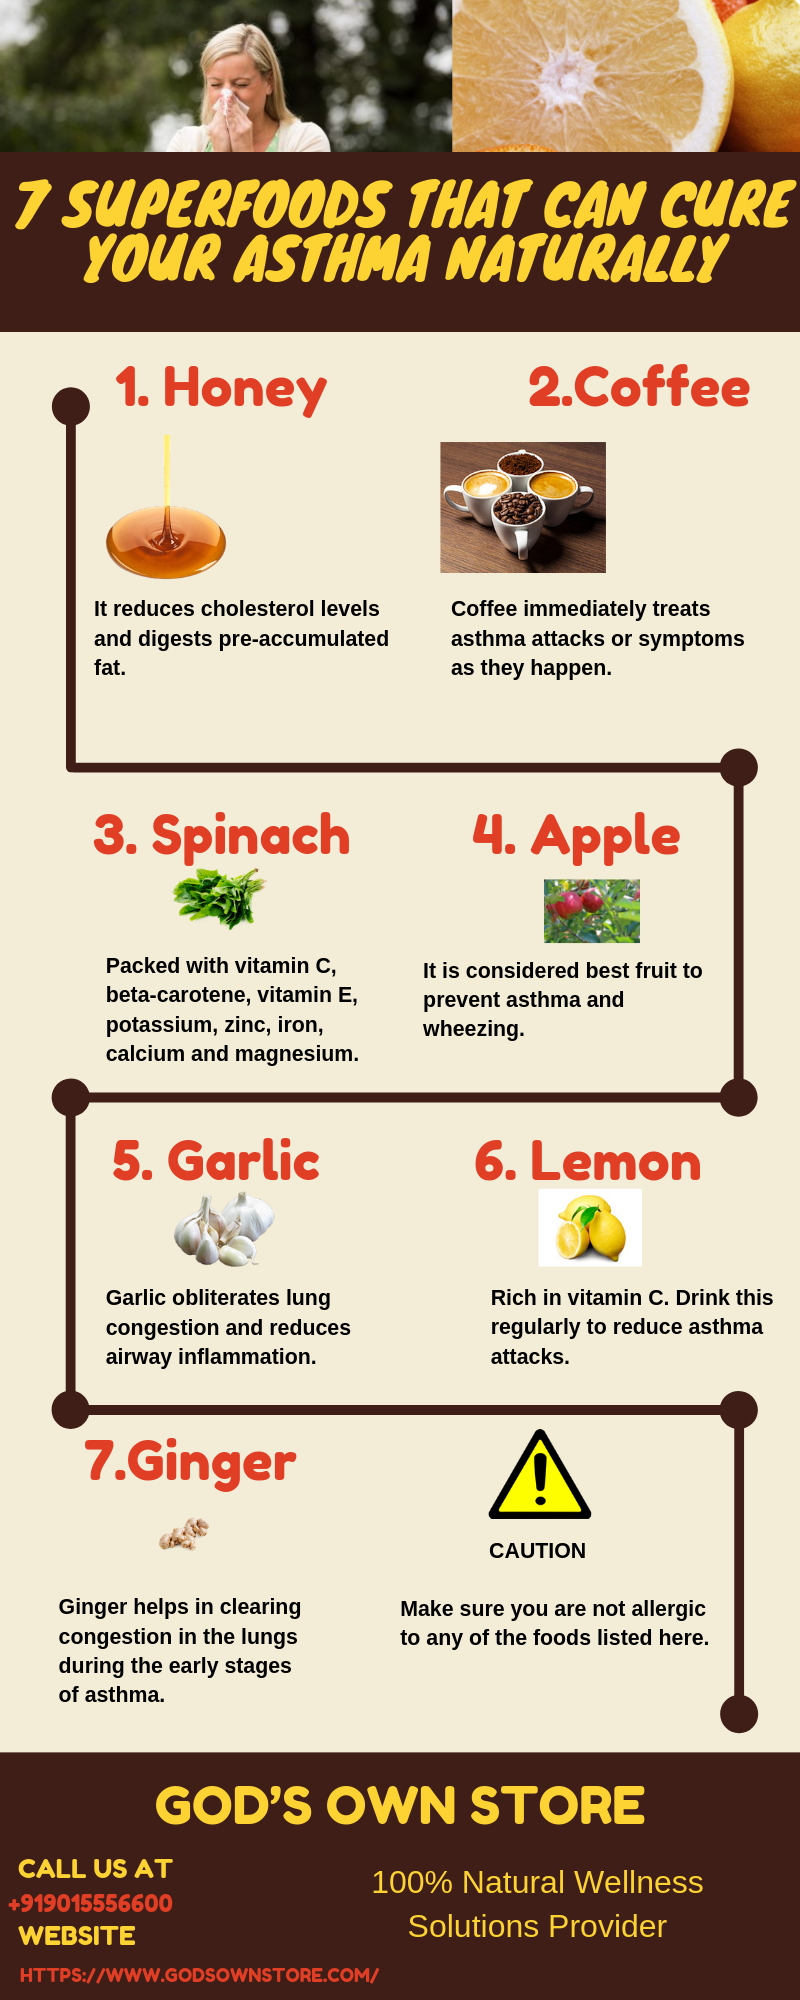 7-SUPERFOODS-THAT-CAN-CURE-YOUR-ASTHMA-NATURALLY-infographic-plaza